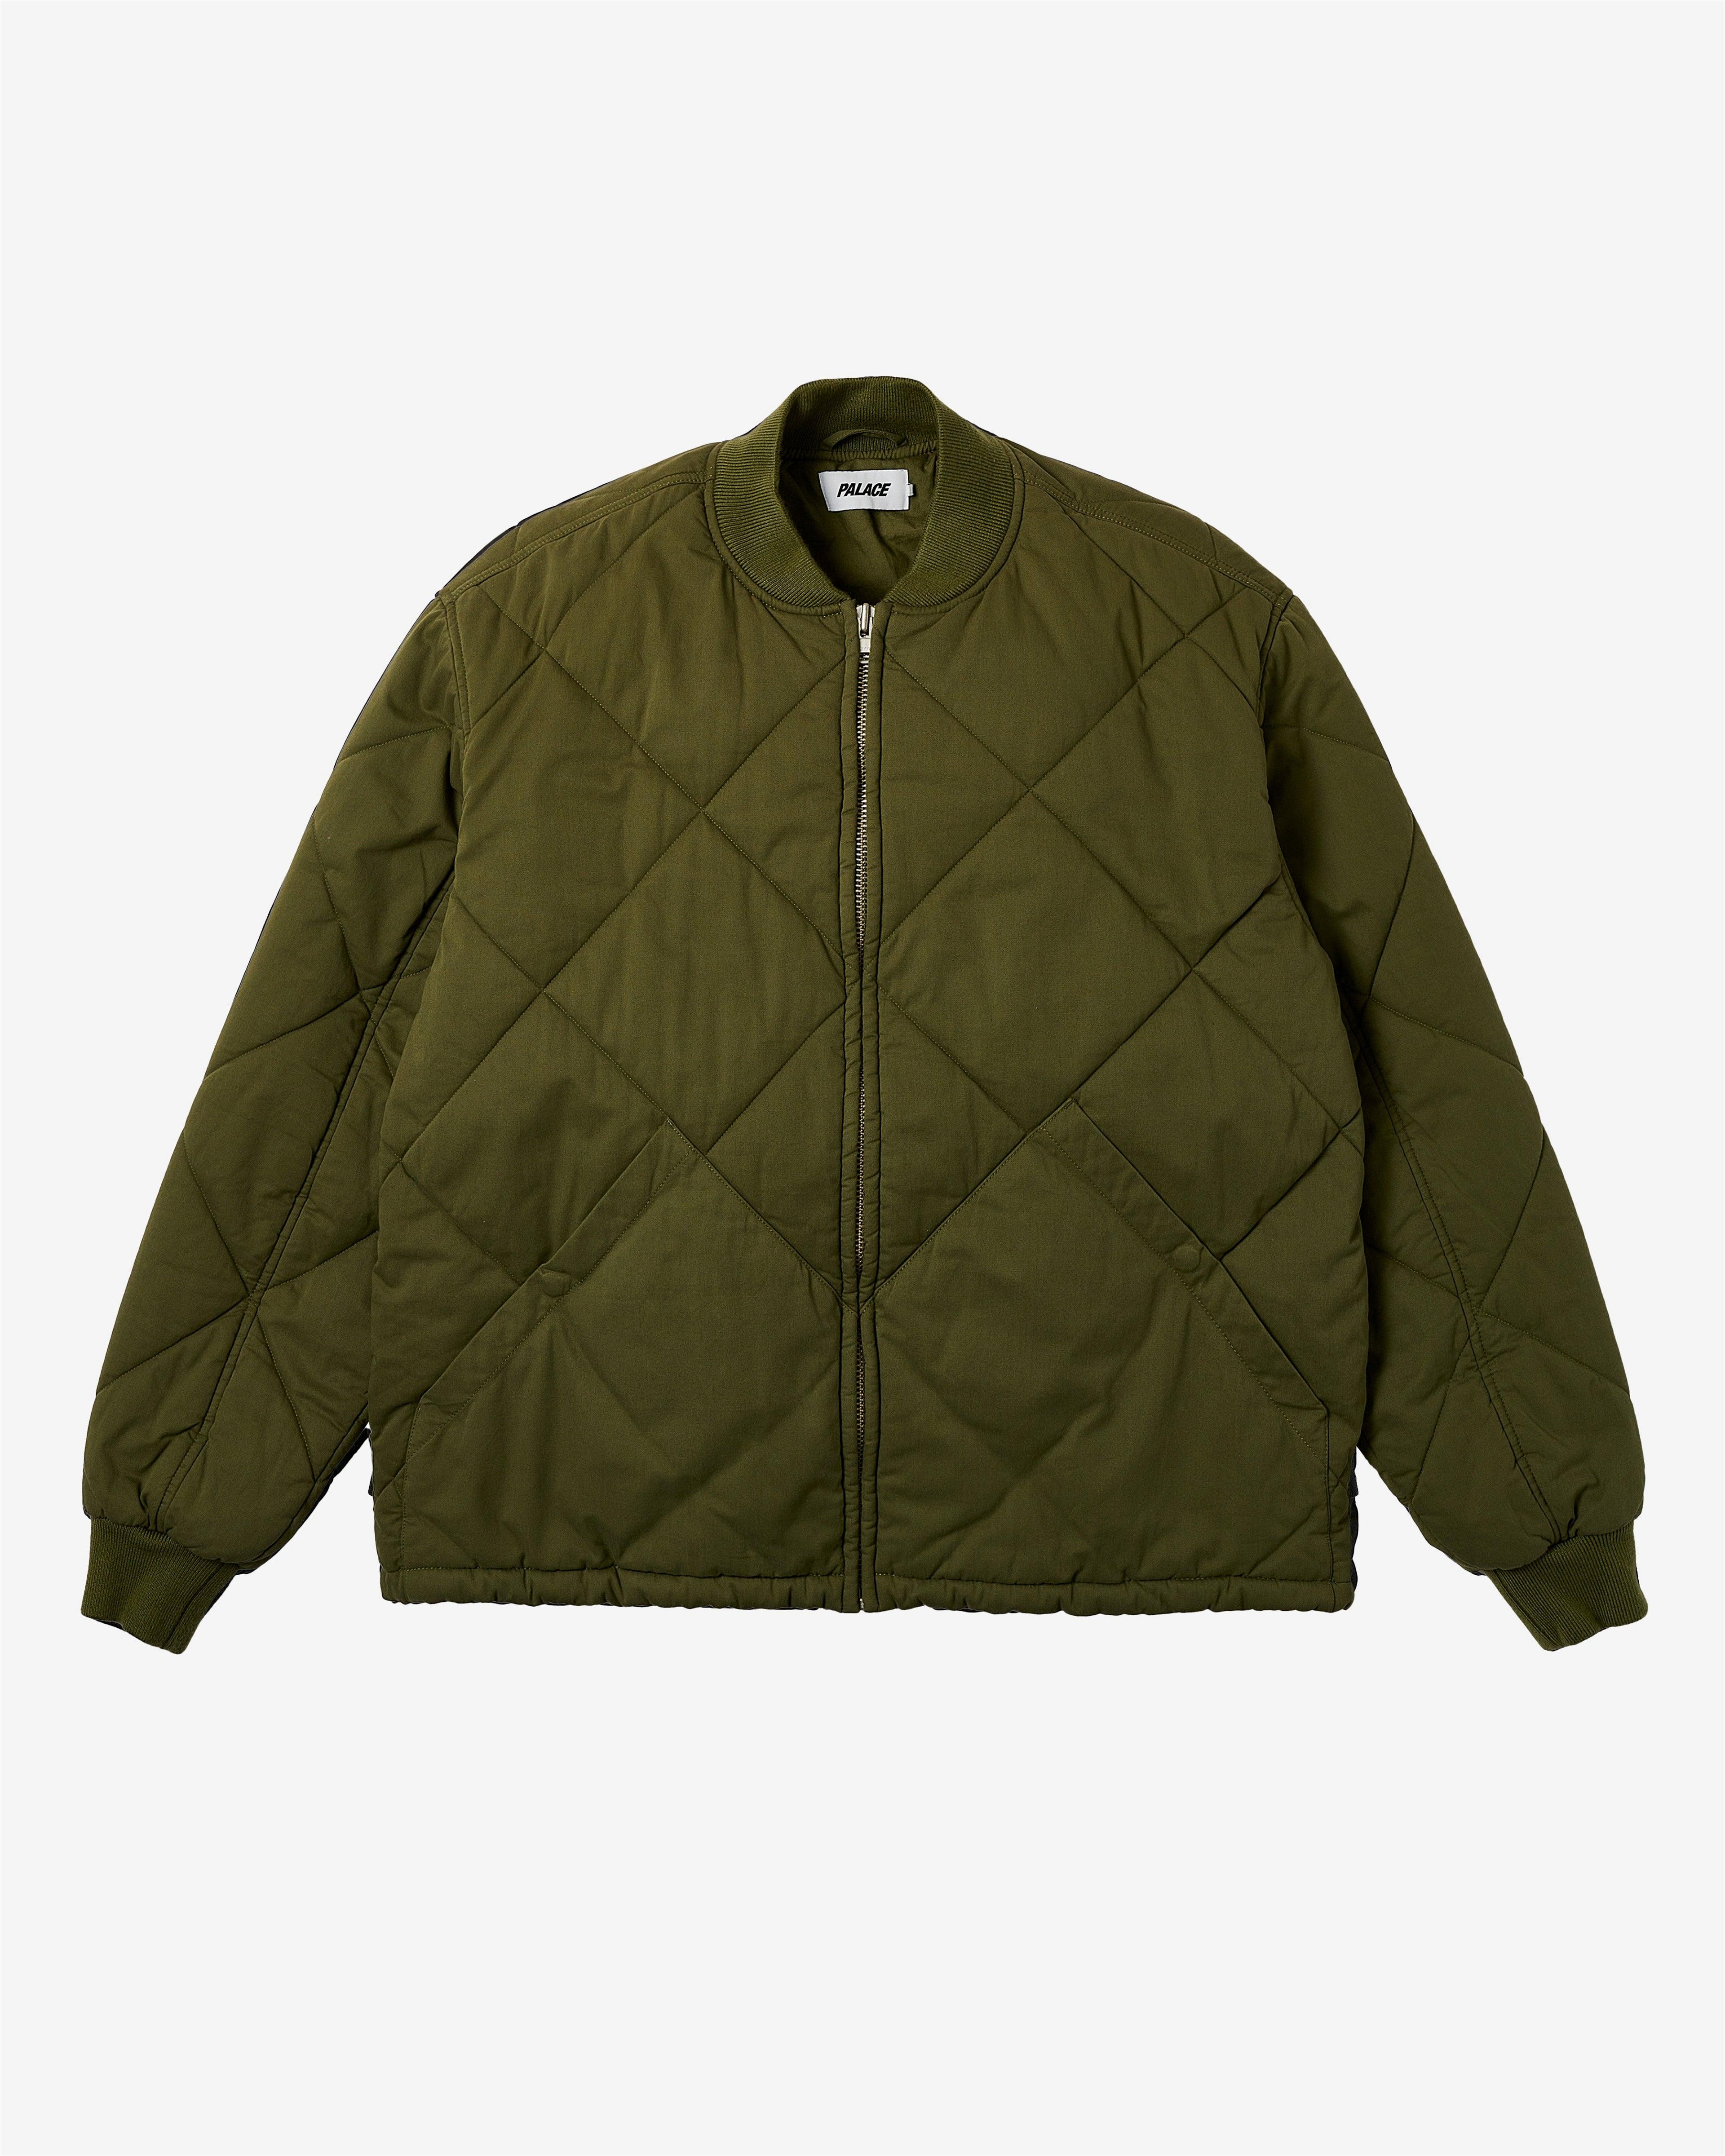 Palace - Men's D-Quilt Bomber - (The Deep Green) by PALACE